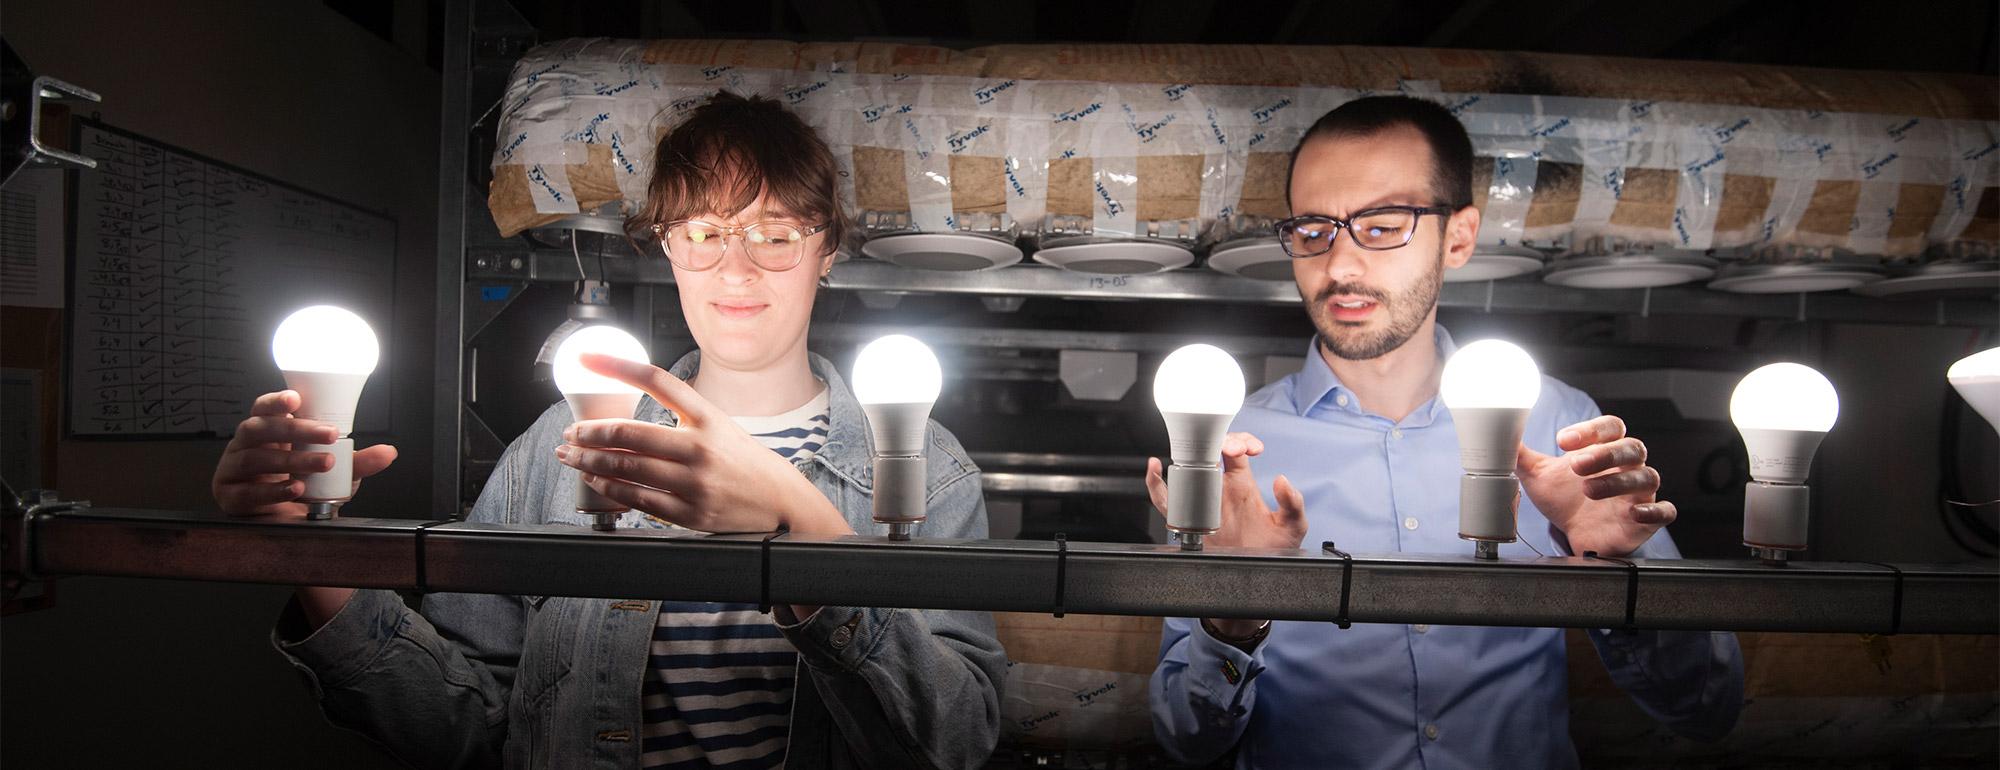 two student research partners with a row of lightbulbs collaborating on a project involving lighting